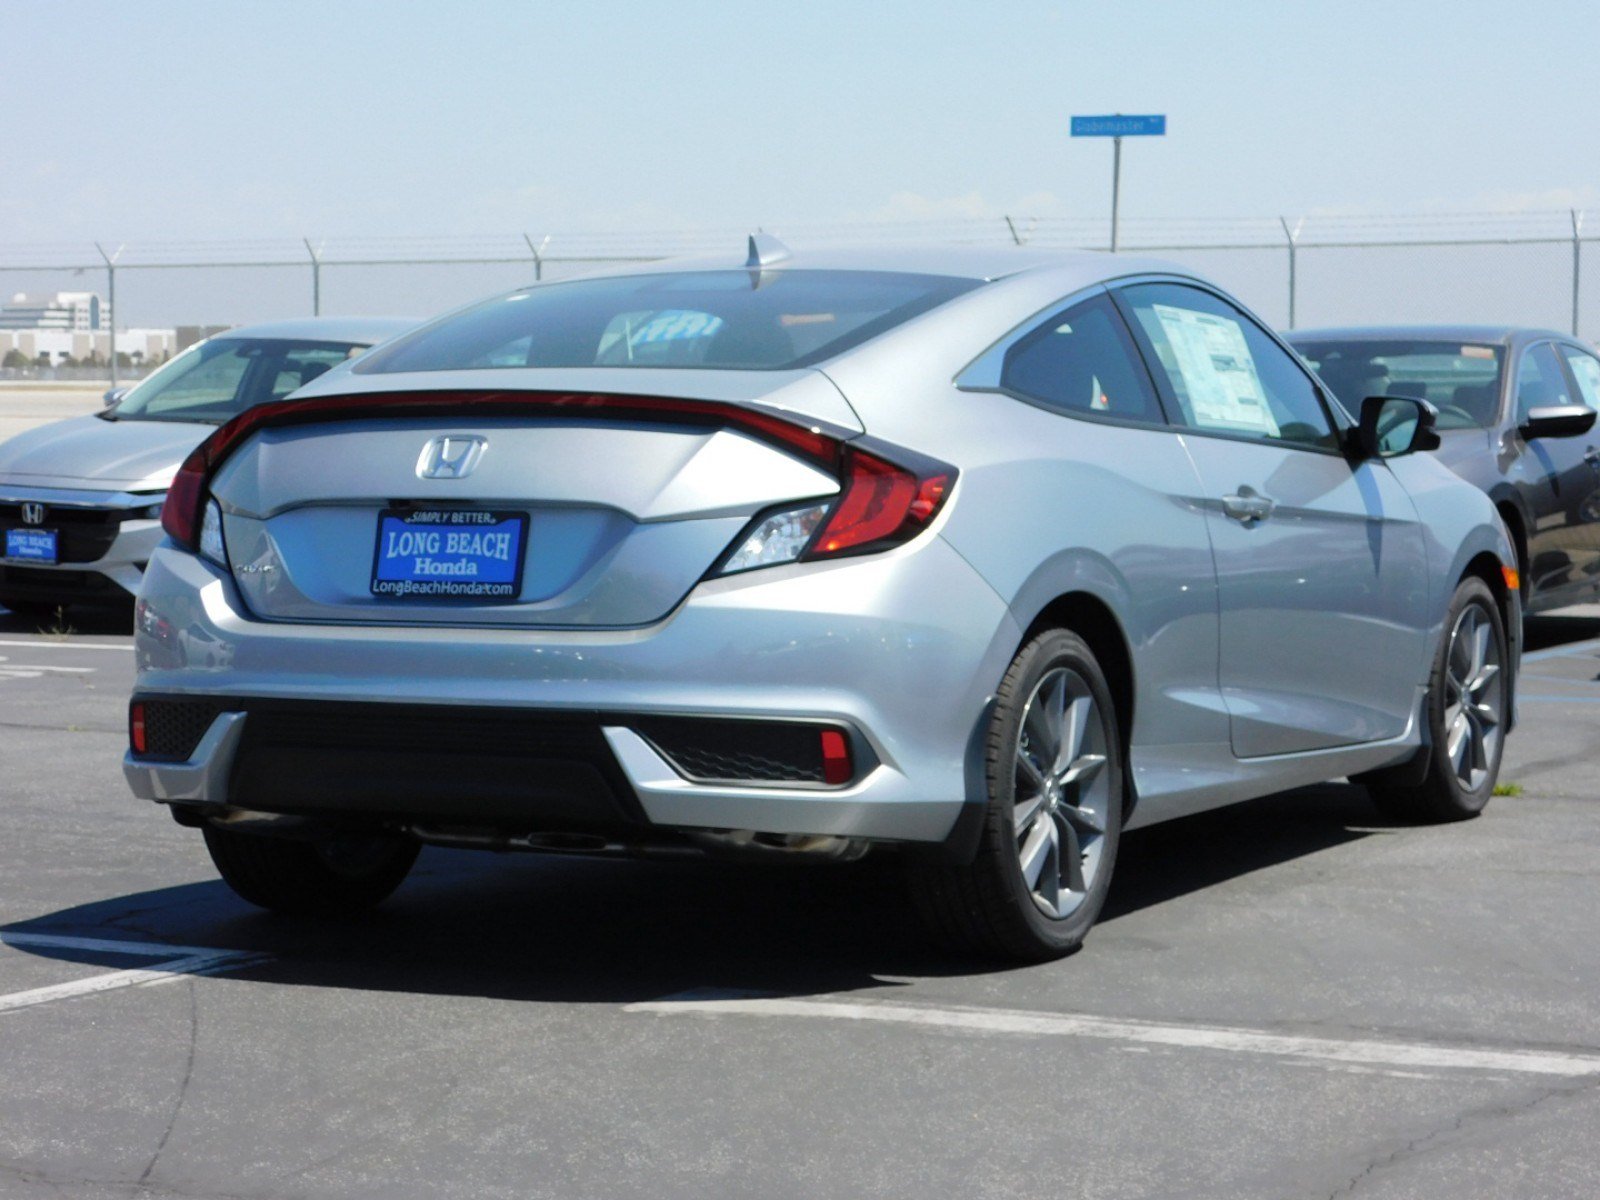 New 2019 Honda Civic Coupe EX 2dr Car in Signal Hill 